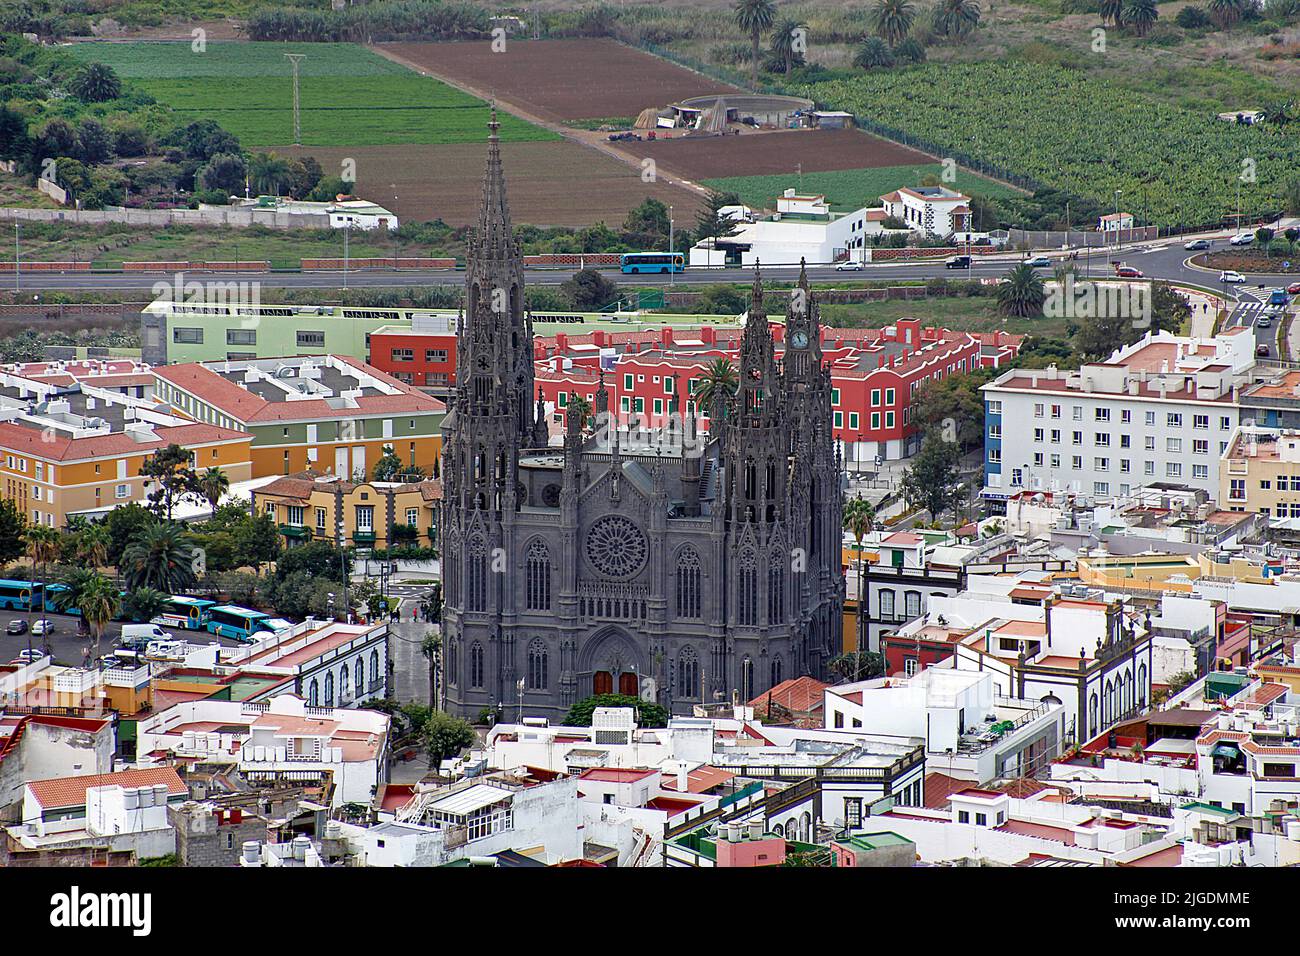 View from the Montana de Arucas over the village Arucas with cathedral San Juan Bautista, landmark of Arucas, Grand Canary, Canary islands, Spain Stock Photo